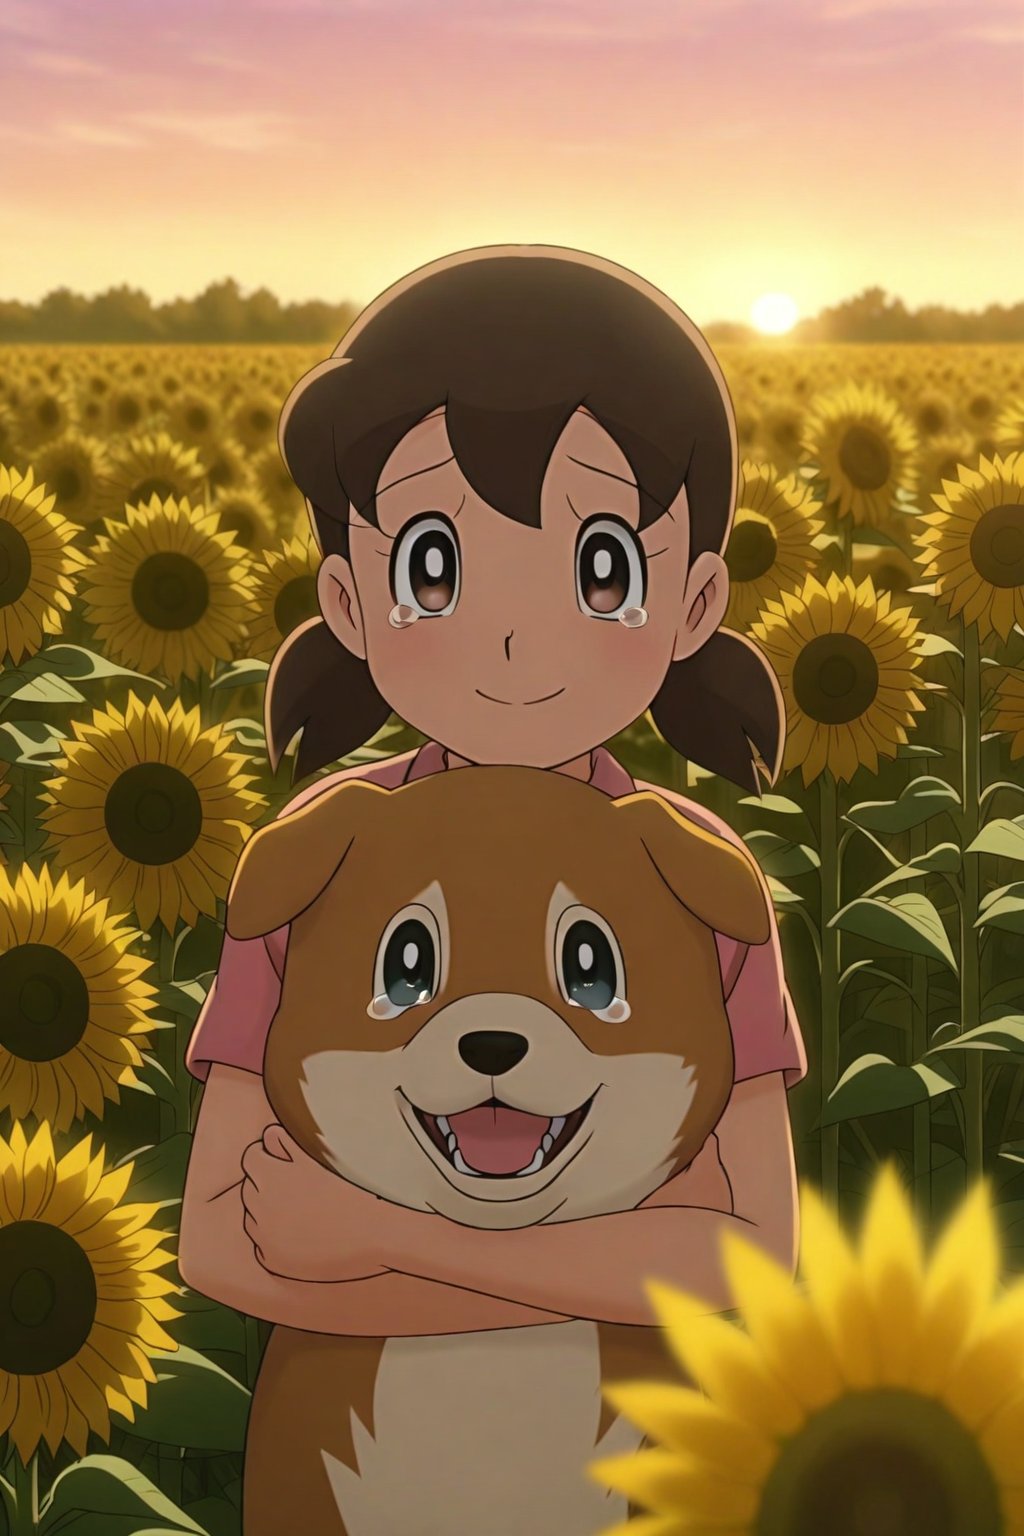 (masterpiece), best quality, expressive eyes, perfect face, anime coloring, 
minamoto shizuka, smile, Teenage girl hugging her long-lost dog in a field of sunflowers, golden sunset light, tears streaming down her face, heartwarming reunion, bokeh effect, cinematic composition
